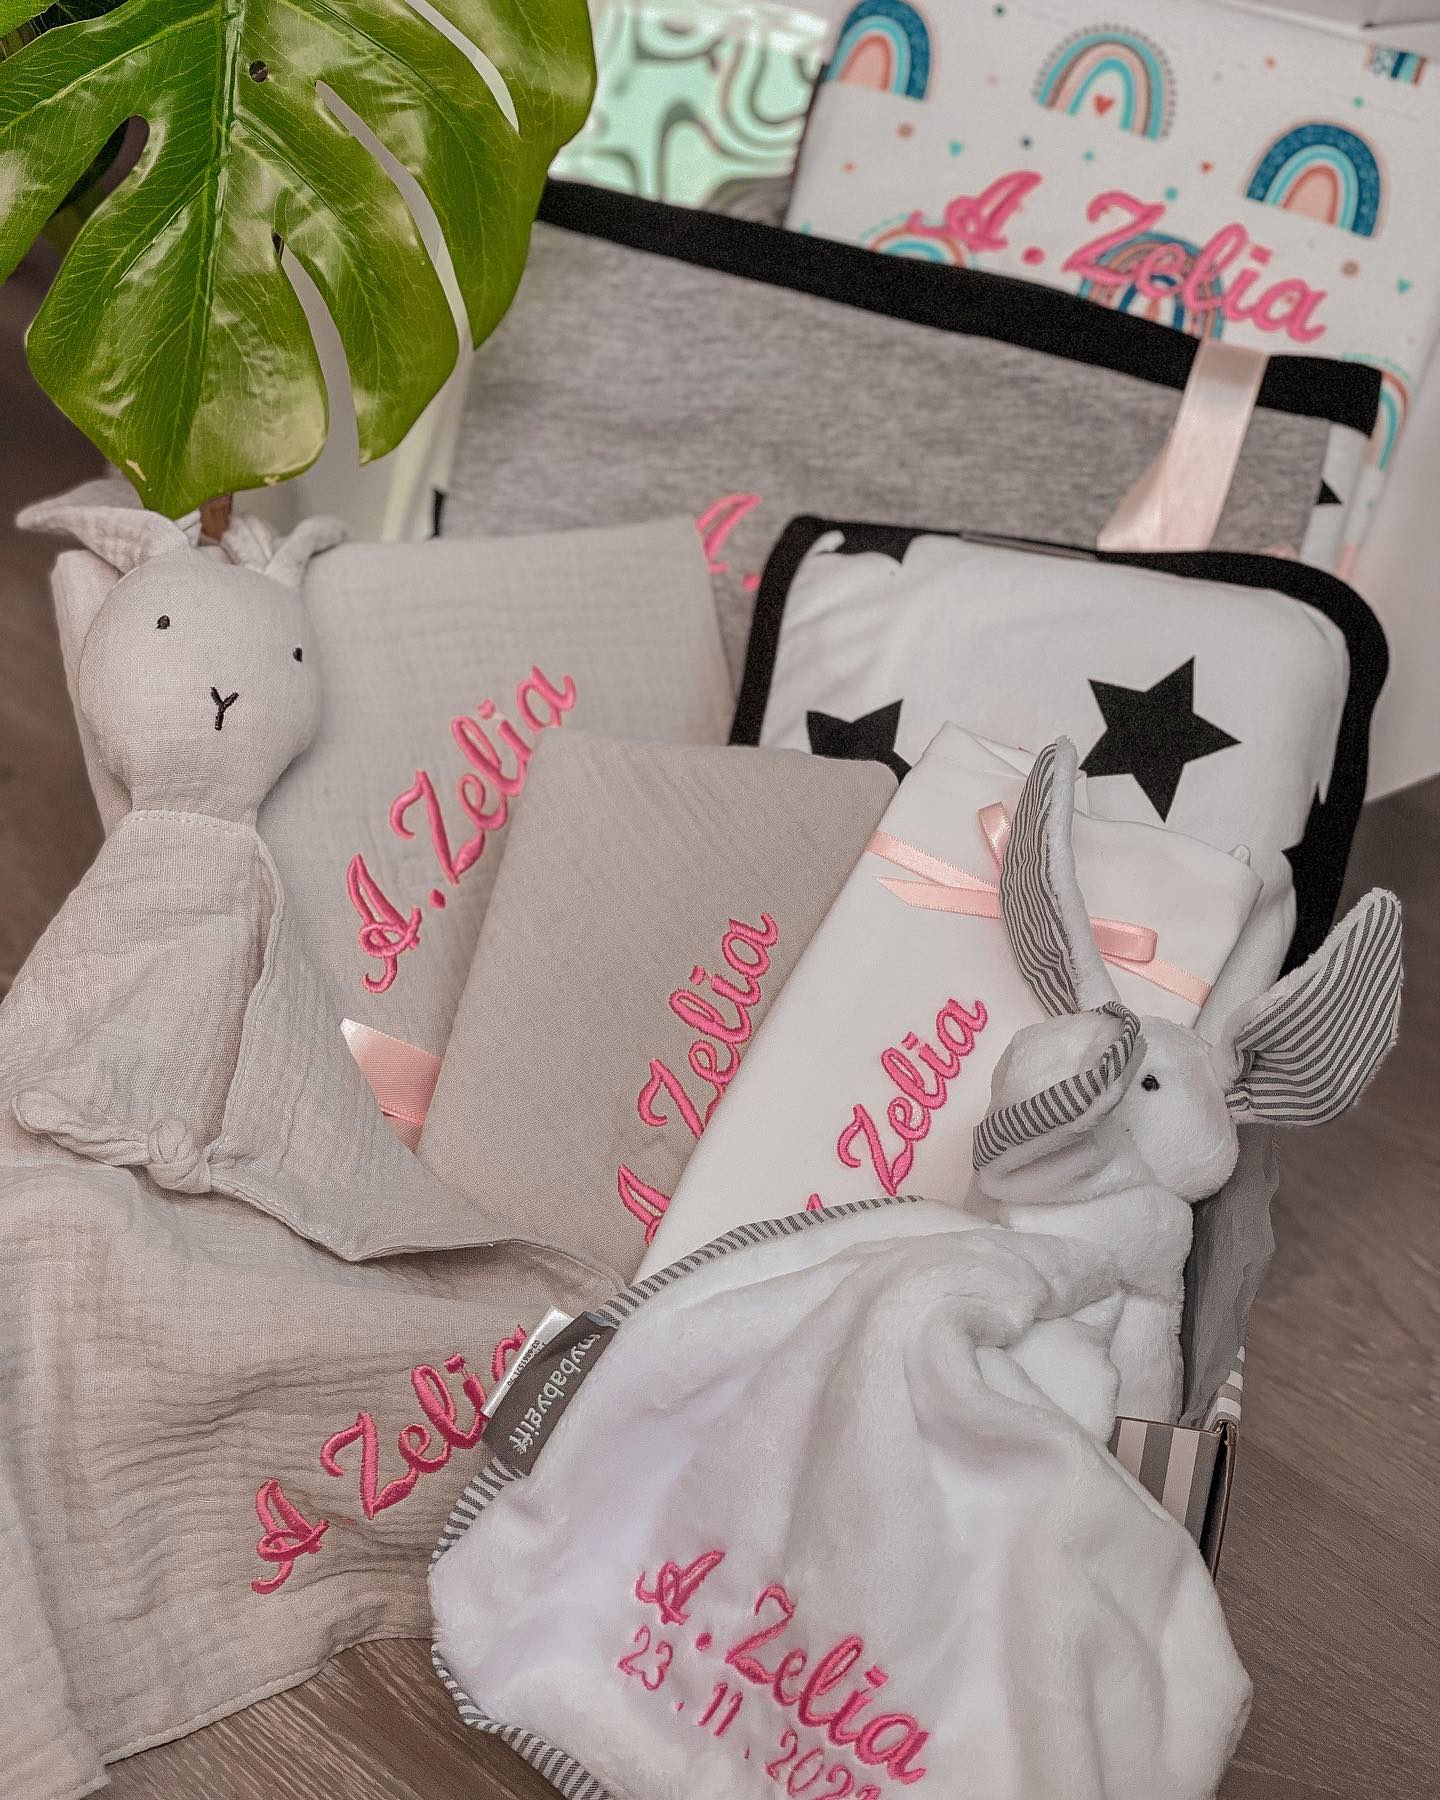 Customised baby gifts - customised hampers